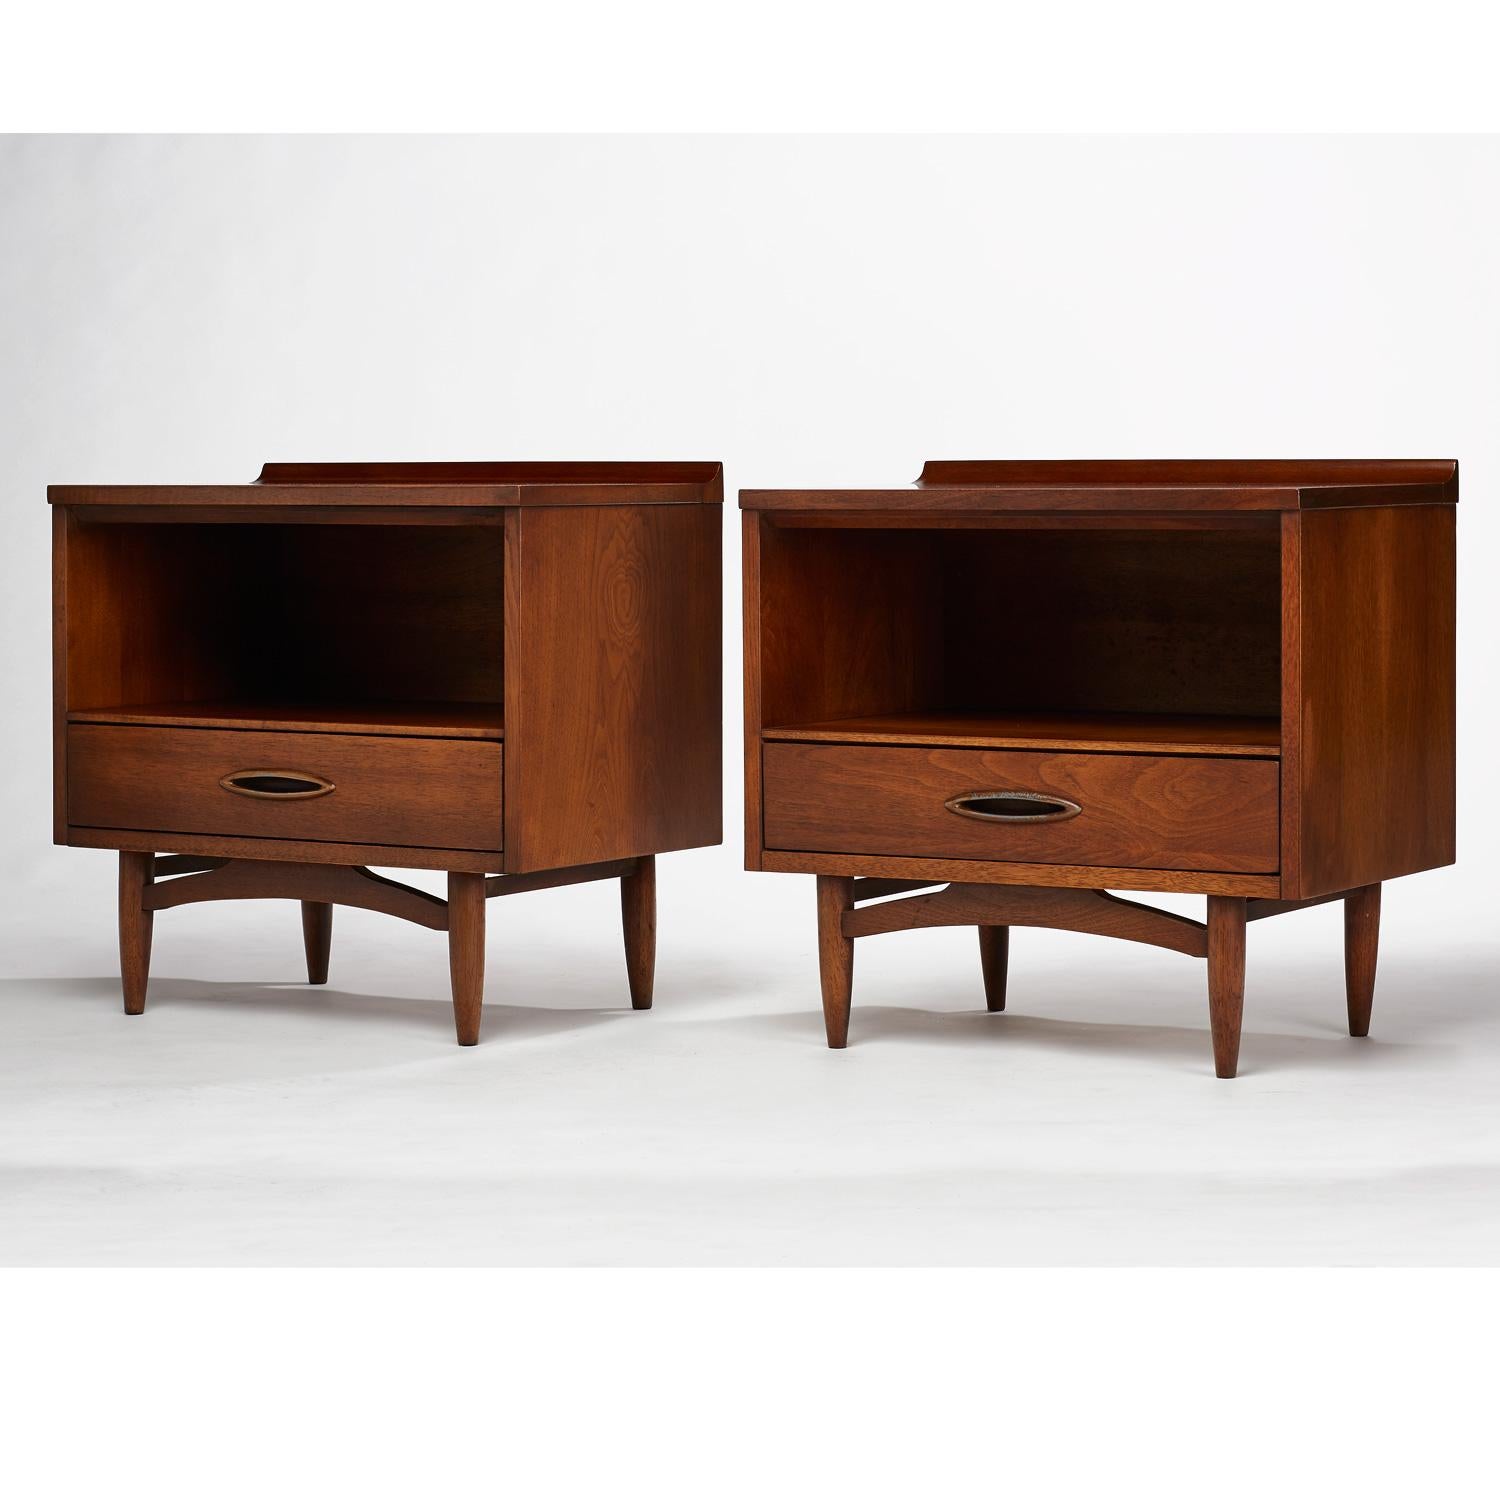 Mid-Century Modern sculptra nightstands by Broyhill Premier. Back edge of top surface is accented with an upward reaching sculpted lip. Open cabinet storage with one pull-out drawer on metal glides. Inset elliptical handles on the drawers enhance